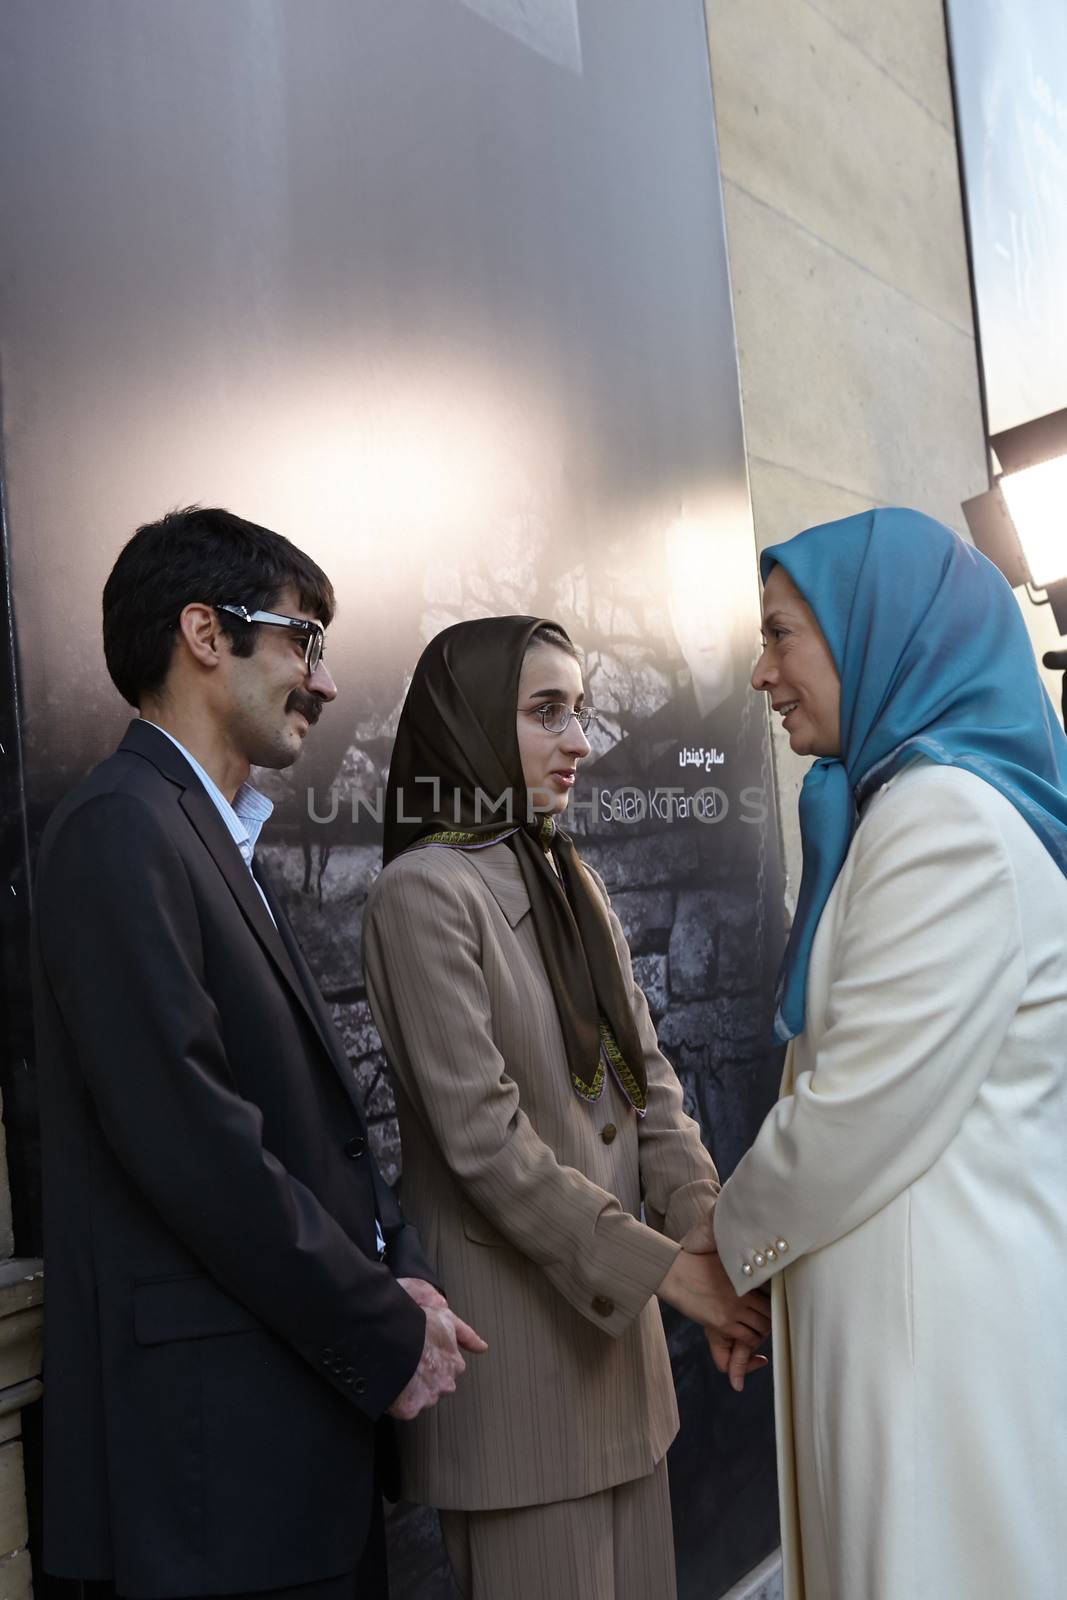 FRANCE, Paris: Iranian politician and President elect of National Council of Resistance of Iran (NCRI) Maryam Radjavi (R) shakes hands with Iranian dissidents Parisa Kohandel (c) and Farzad Madadzadeh (L) during the 2015 World Day Against the Death Penalty, in Paris, on October 10, 2015. The international conference held in Paris on the occasion of the World Day Against the Death Penalty highlighted the surge of executions in Iran and need for urgent action. The Iranian regime has executed more than 120,000 political prisoners in the past 34 years.